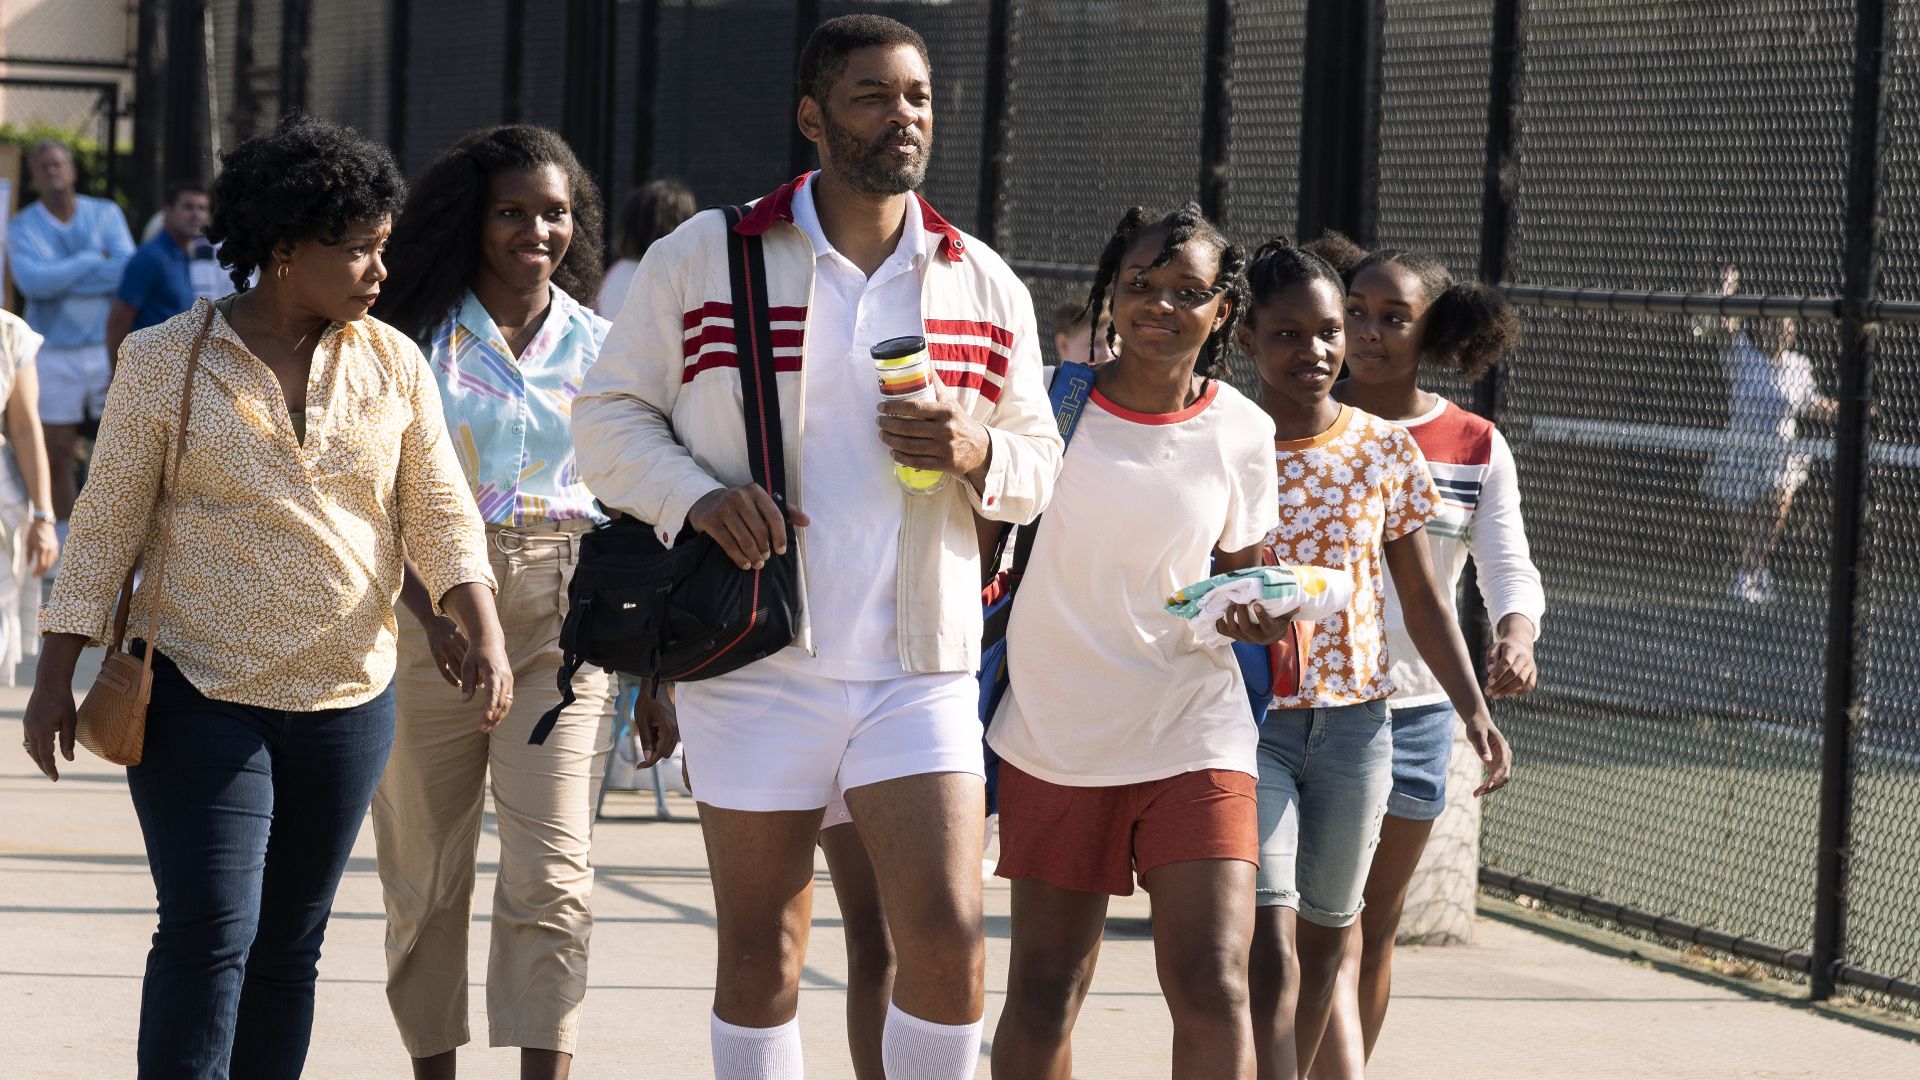 The Williams family walks by a tennis court in King Richard